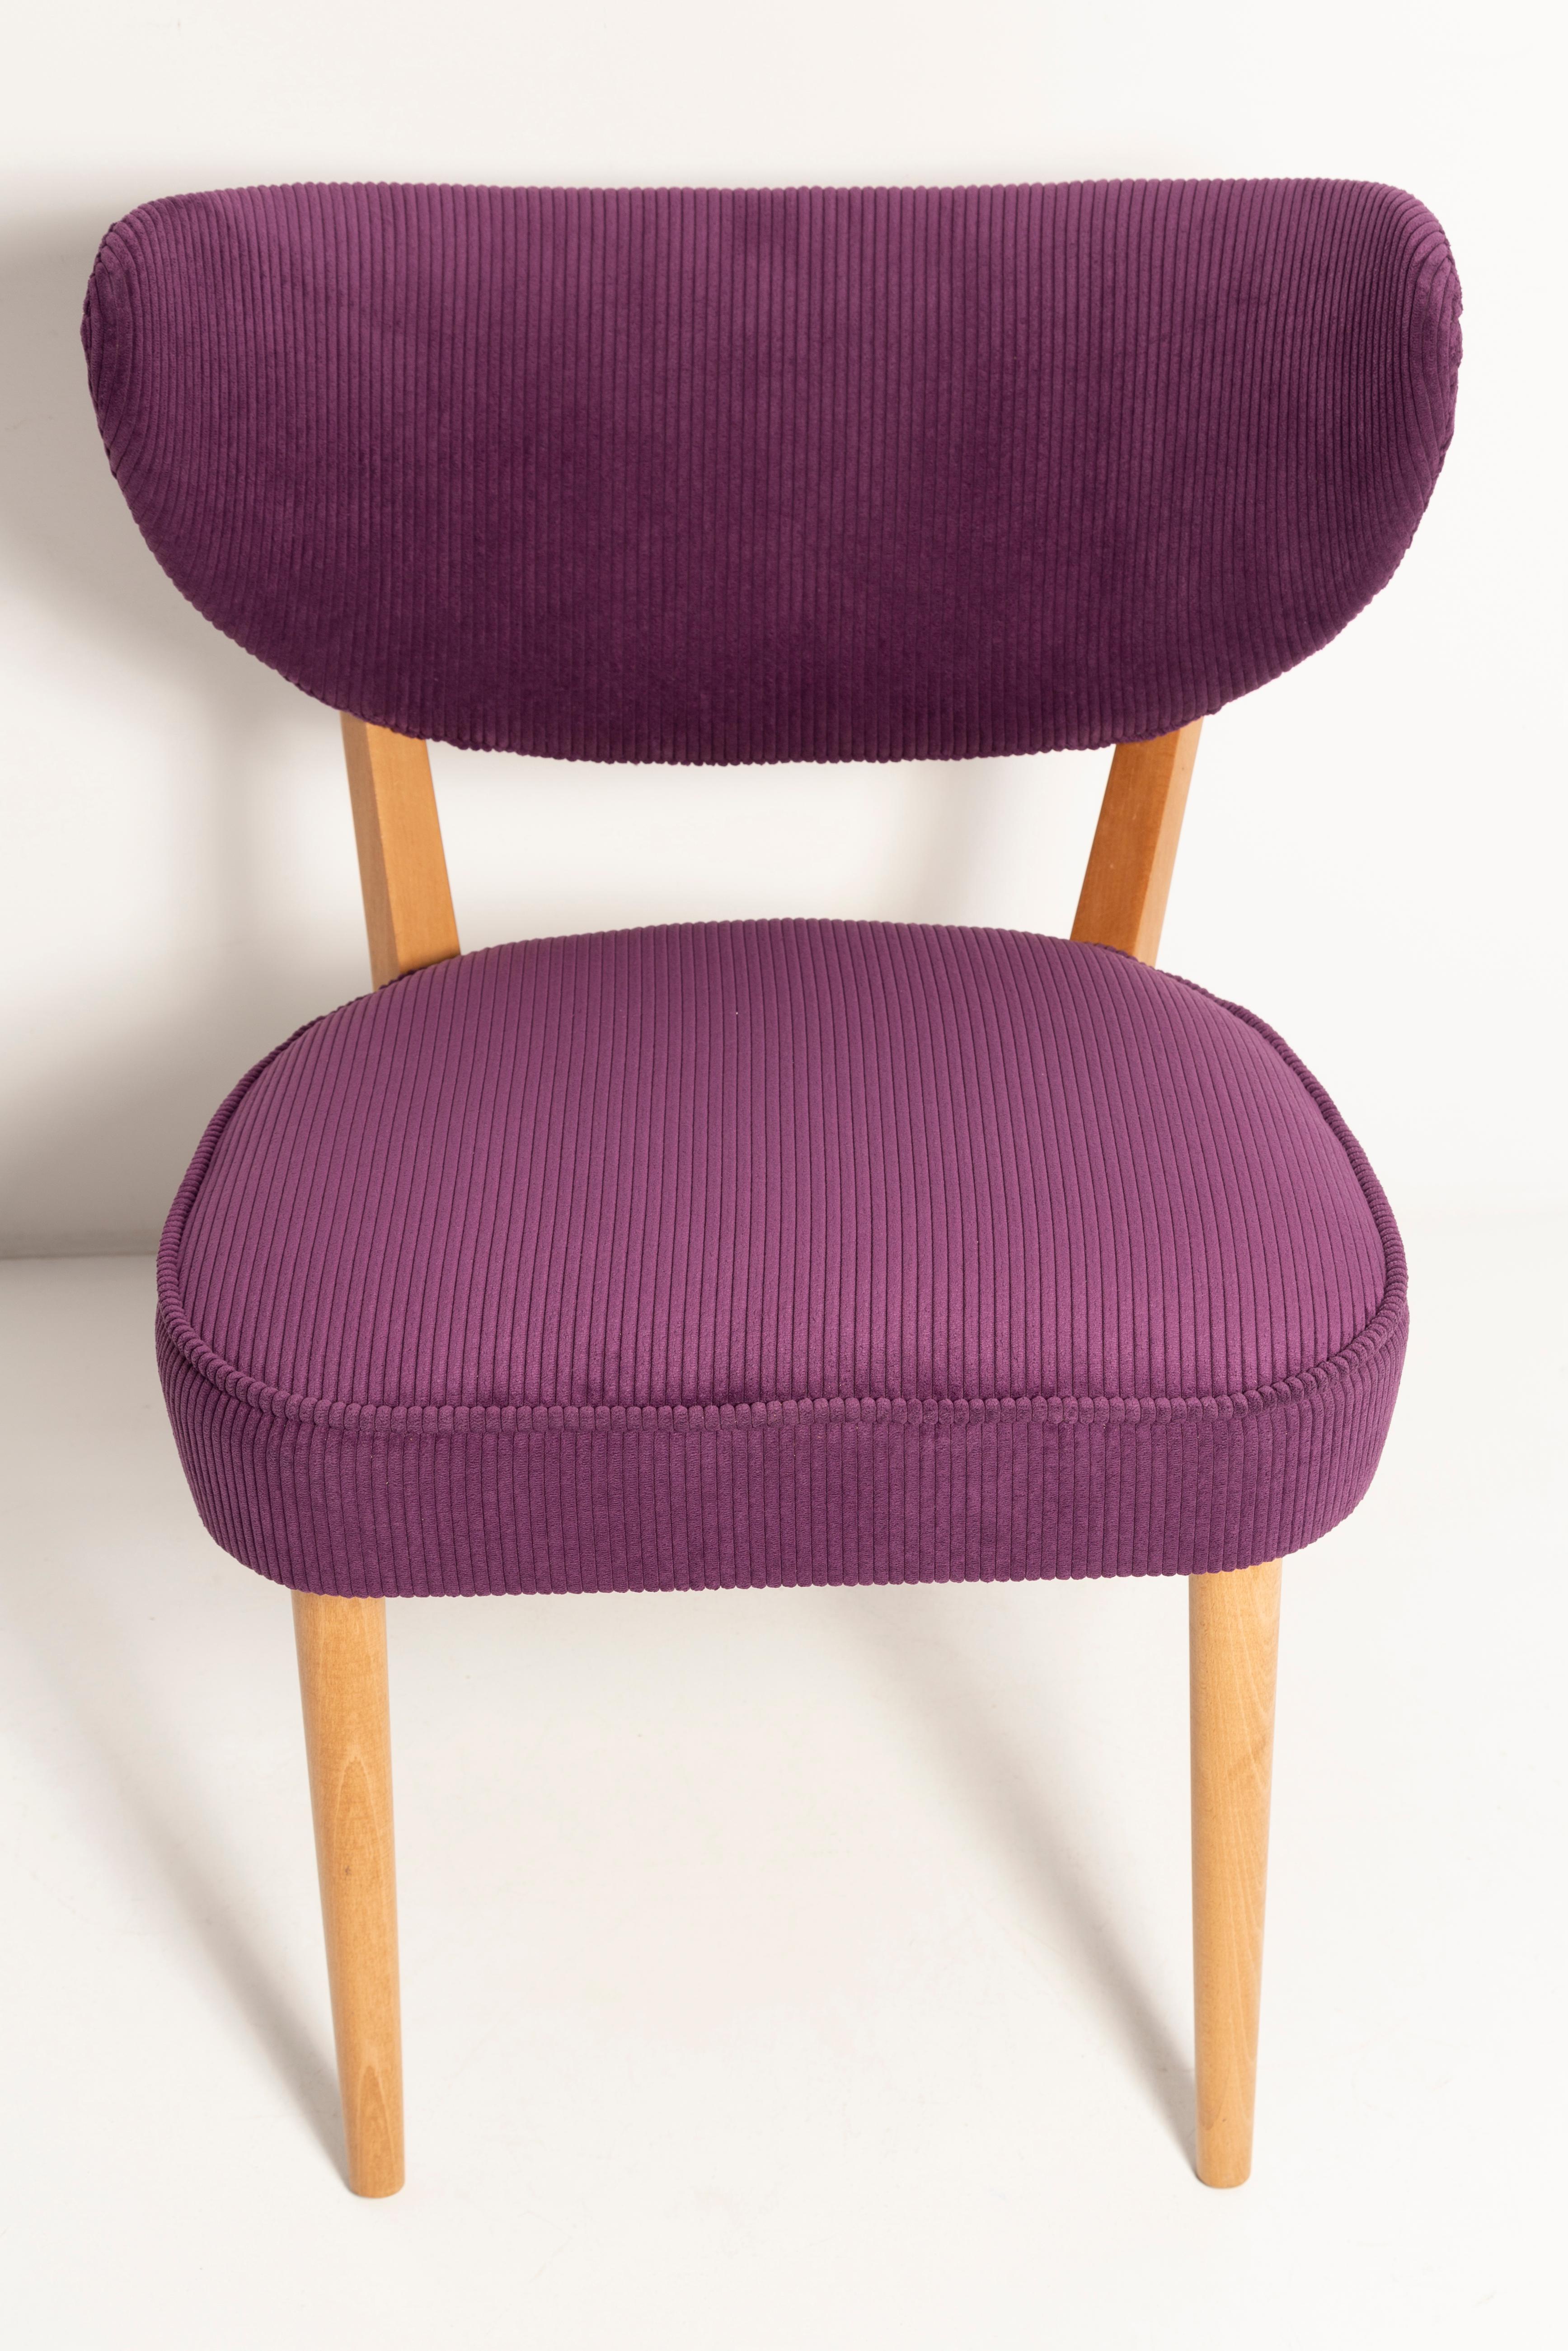 Pair of Midcentury Style Violet Velvet Club Chairs, by Vintola Studio, Europe For Sale 5